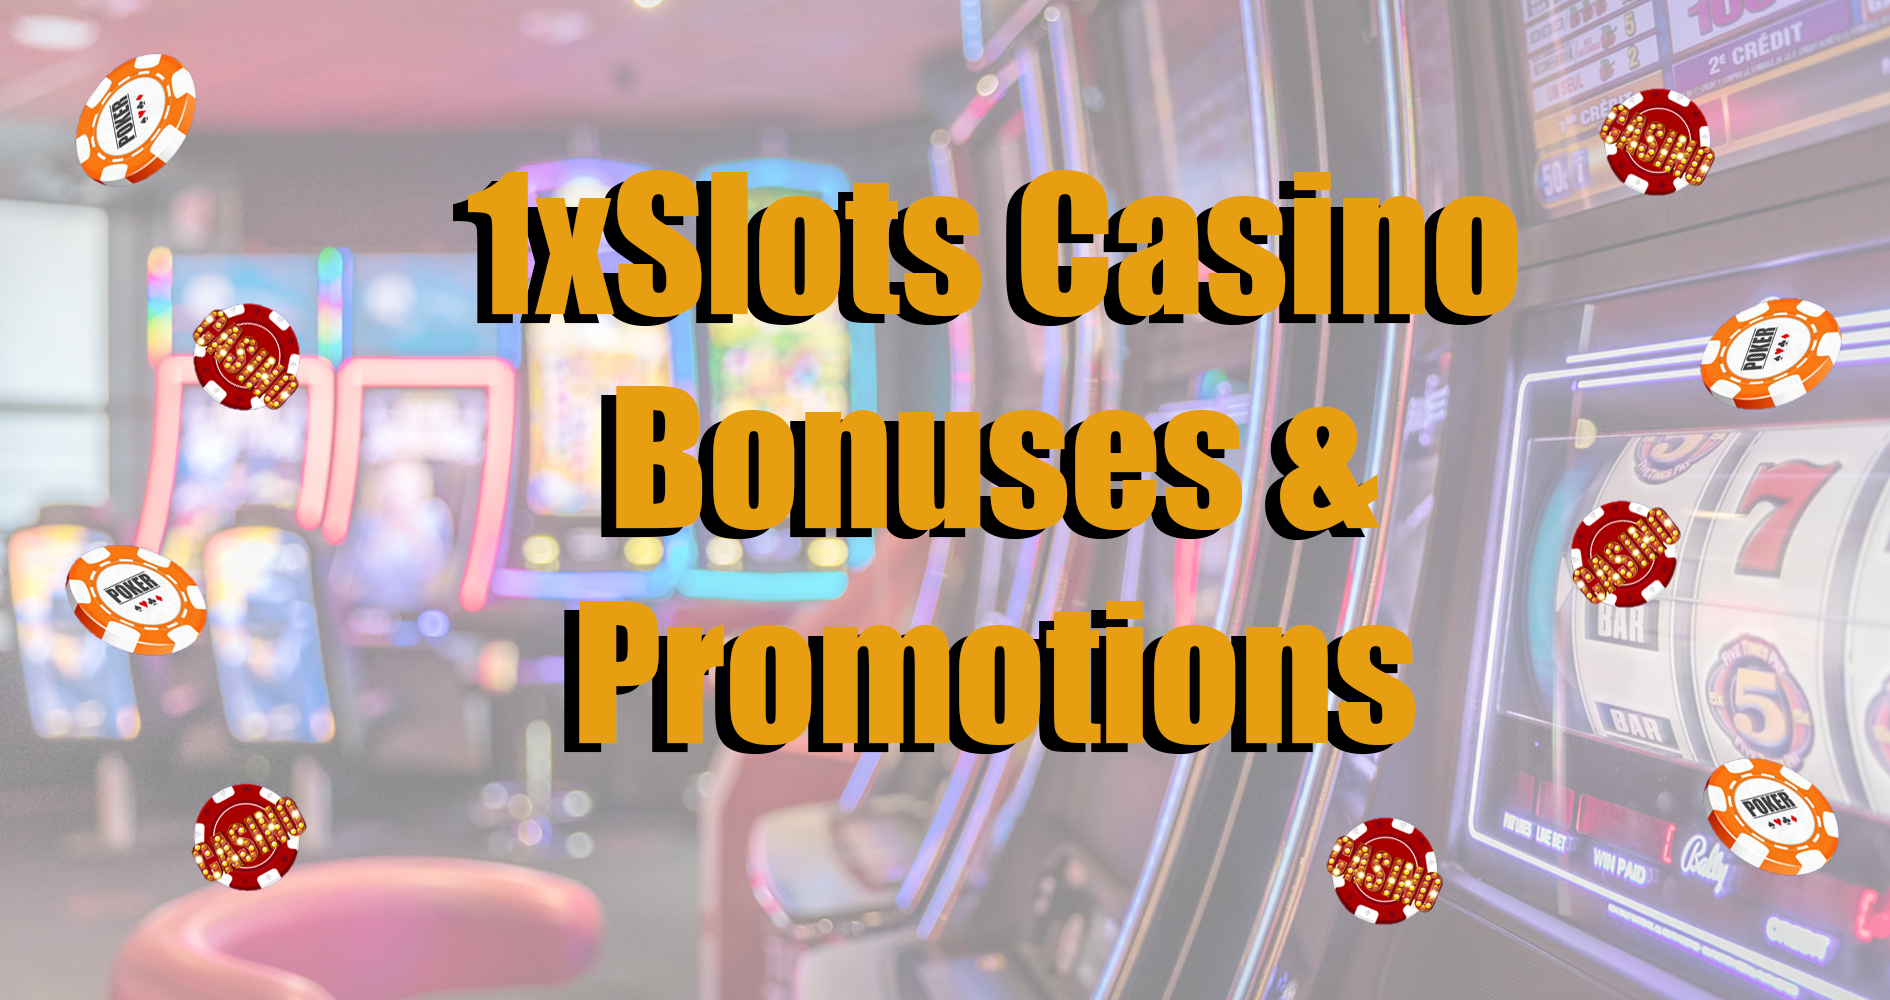 Current 1xSlot Bonuses and Promotions.